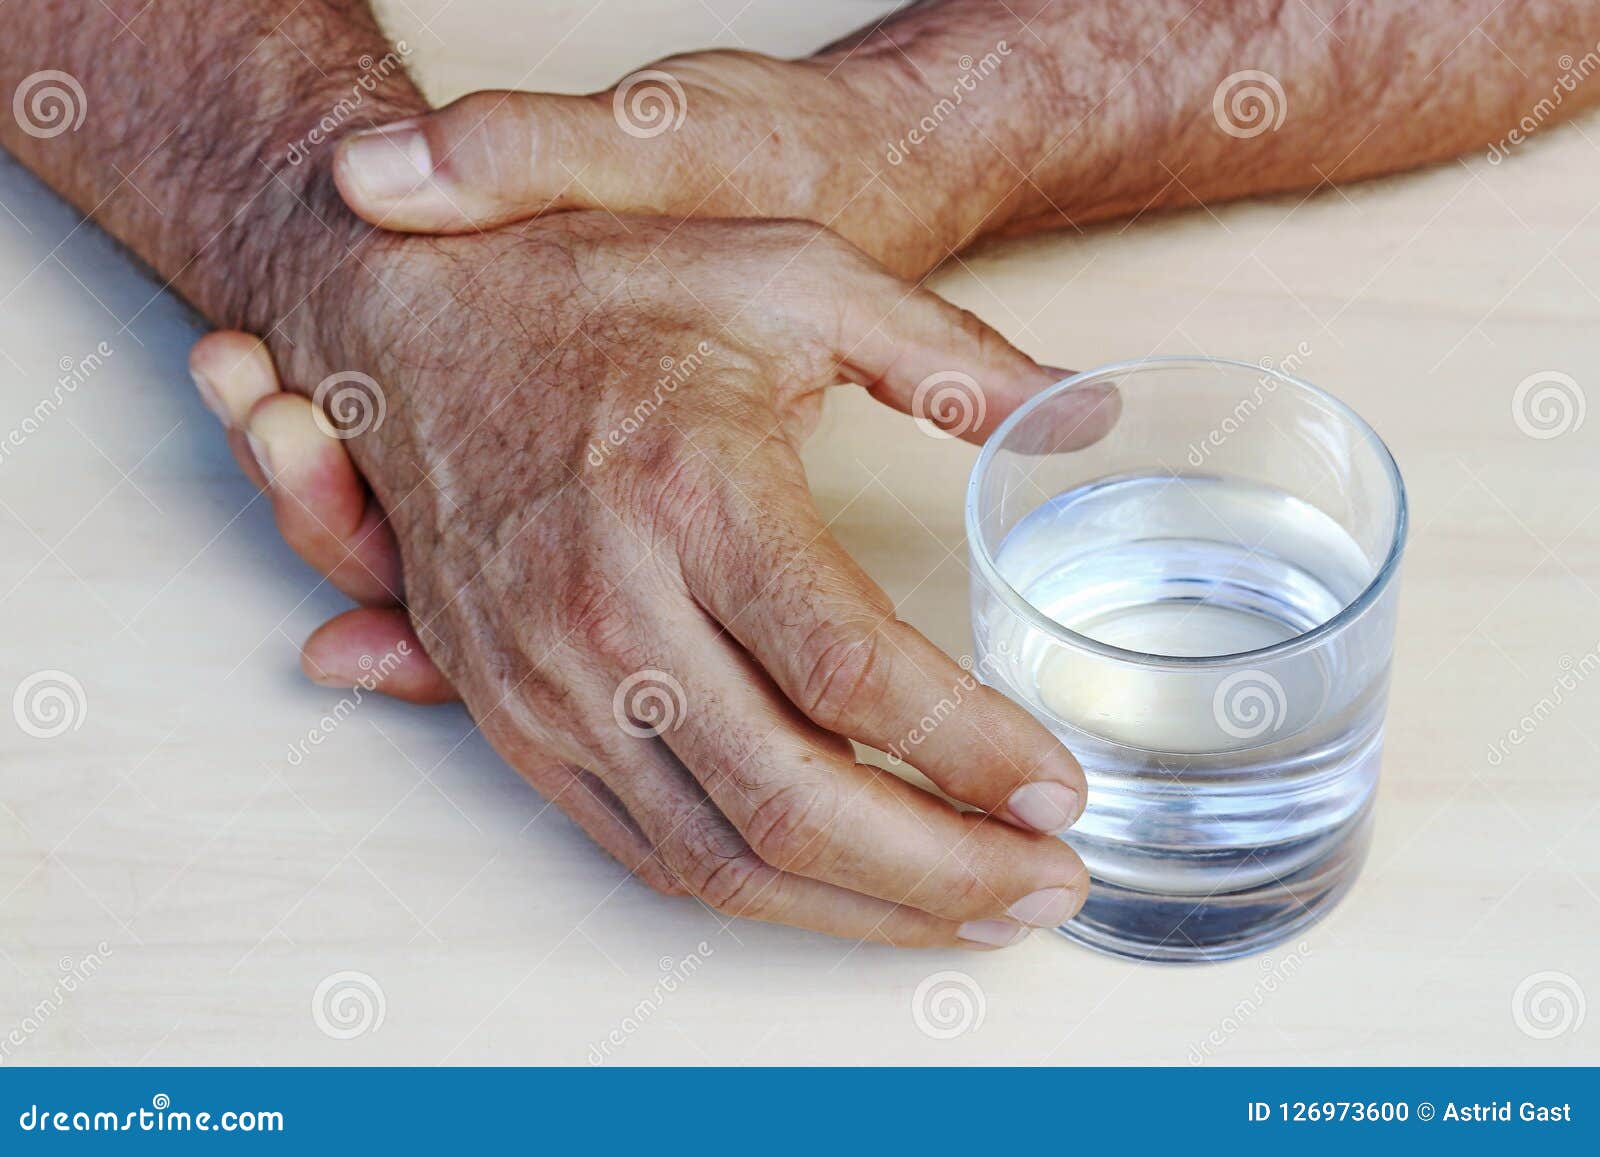 the hands of a man with parkinson`s disease tremble